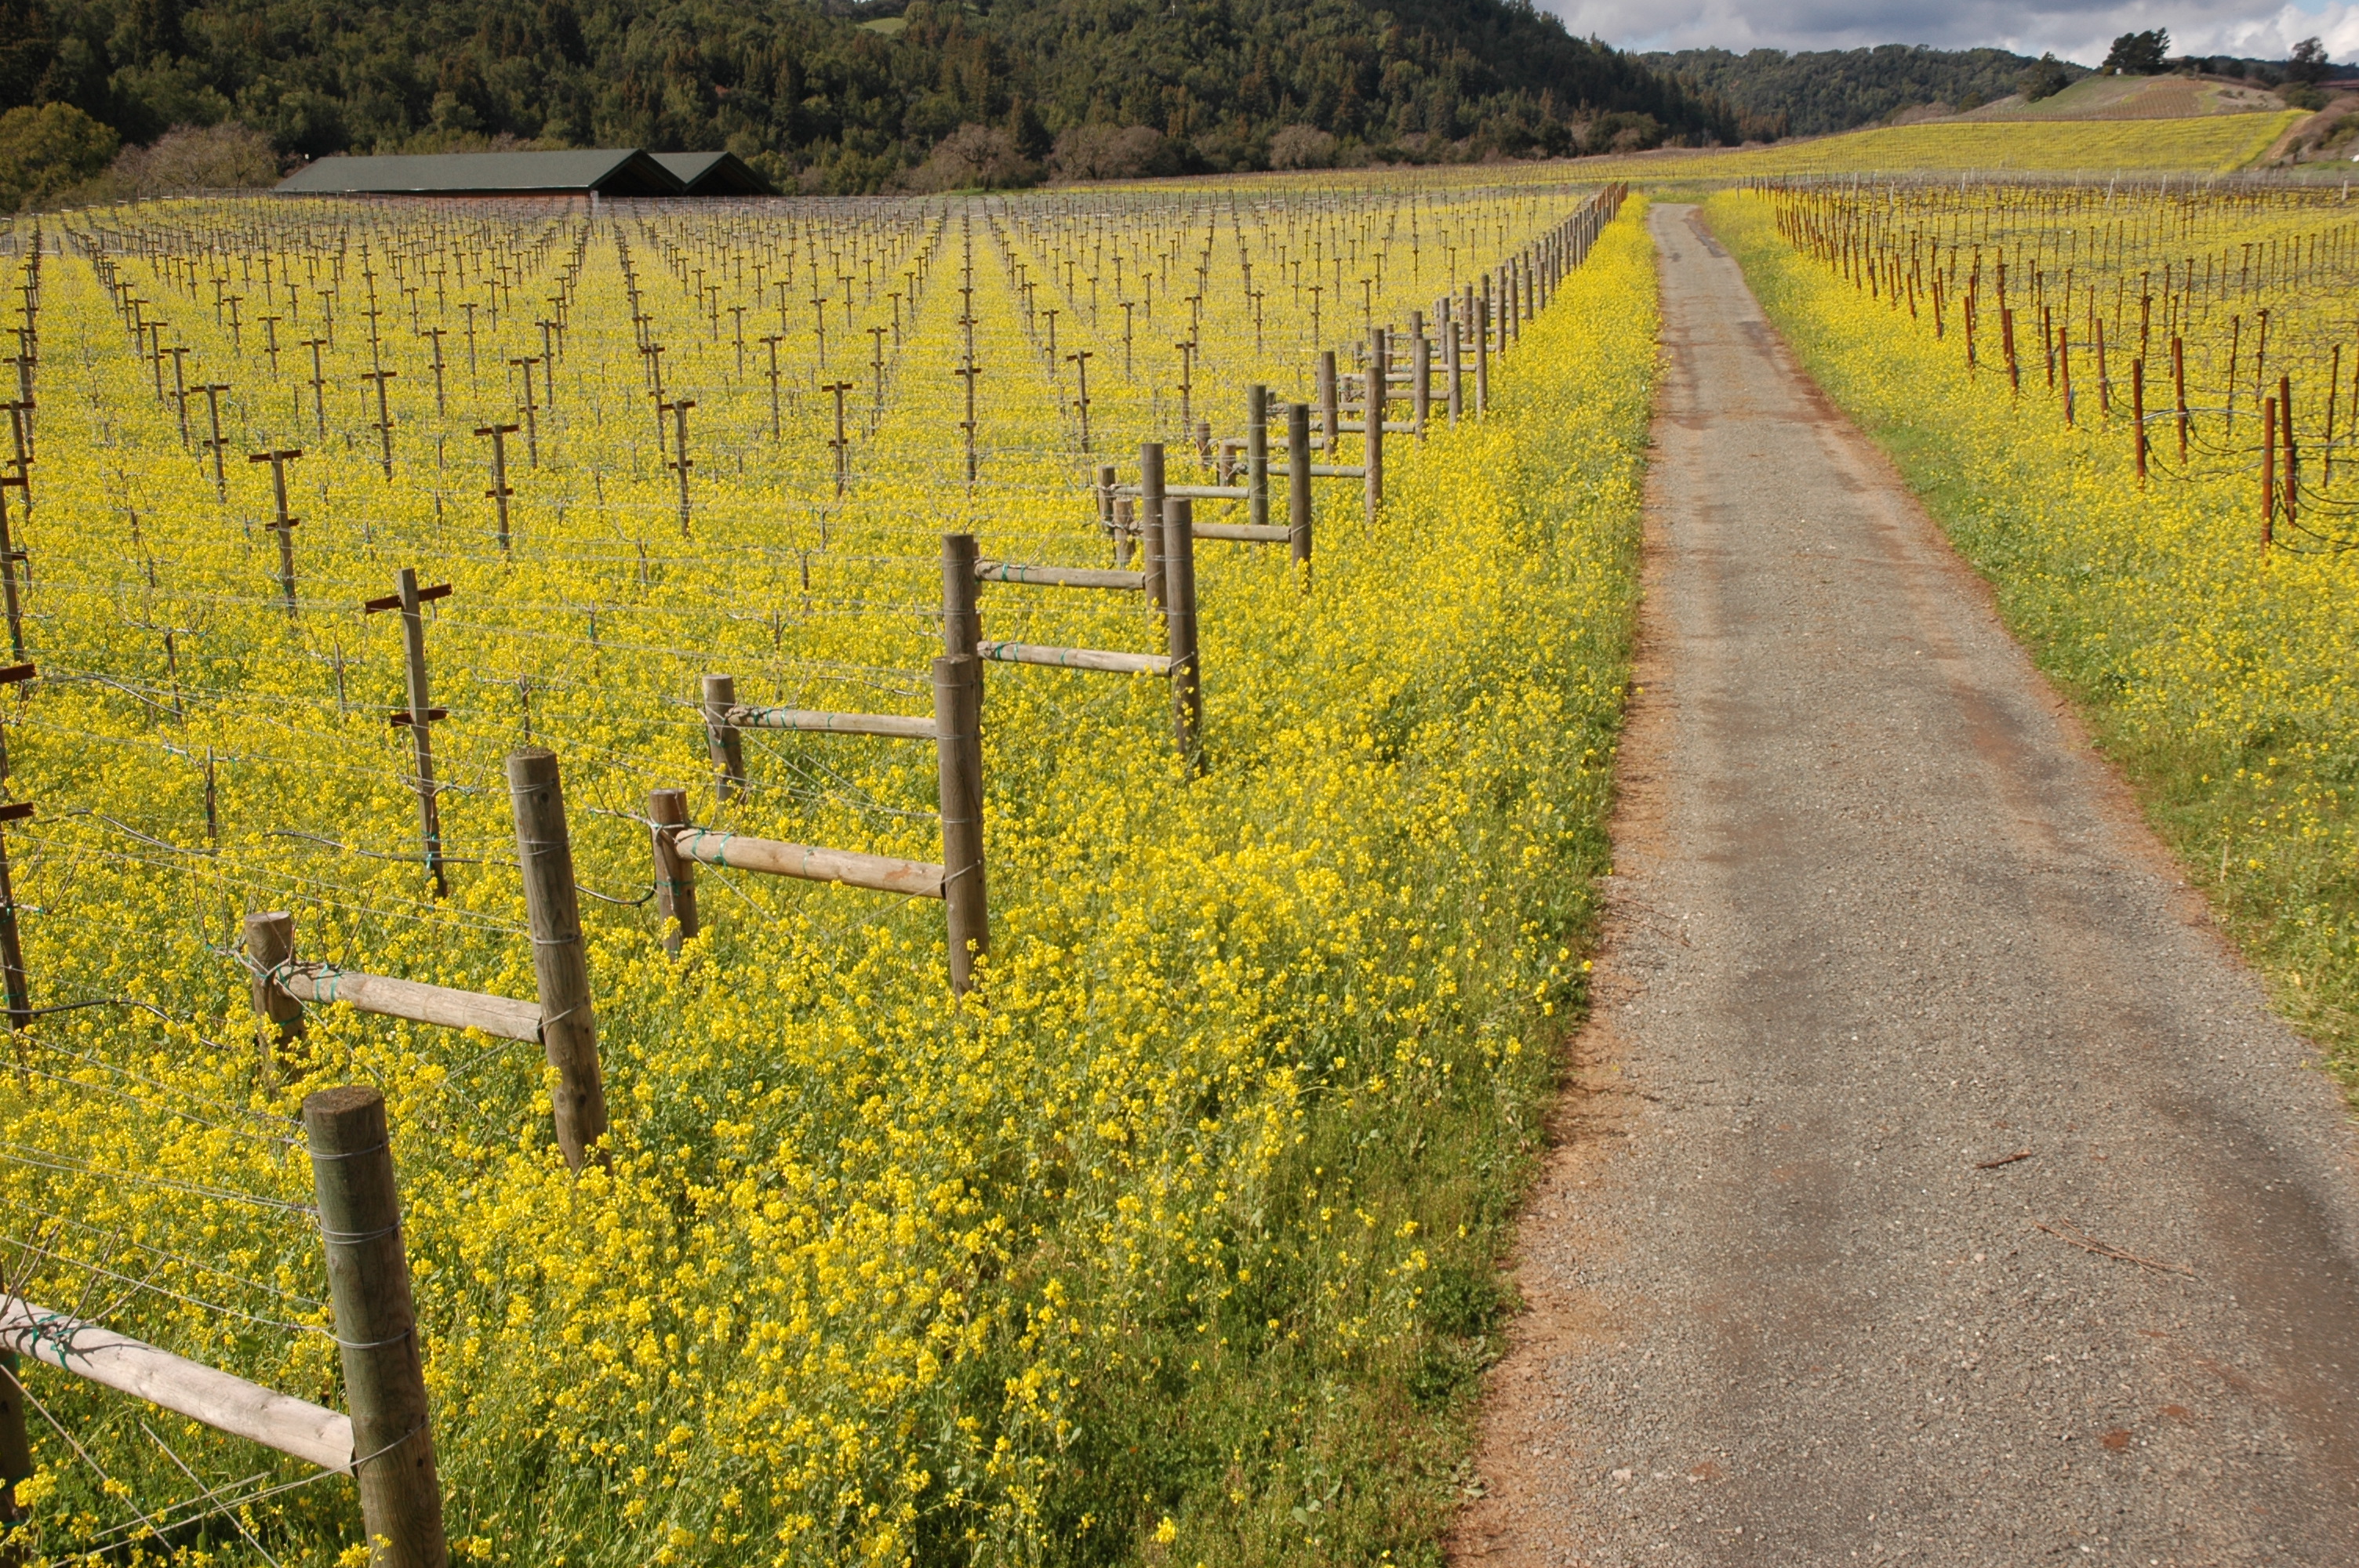 View of vineyard with yellow mustard flowers filling the rows.